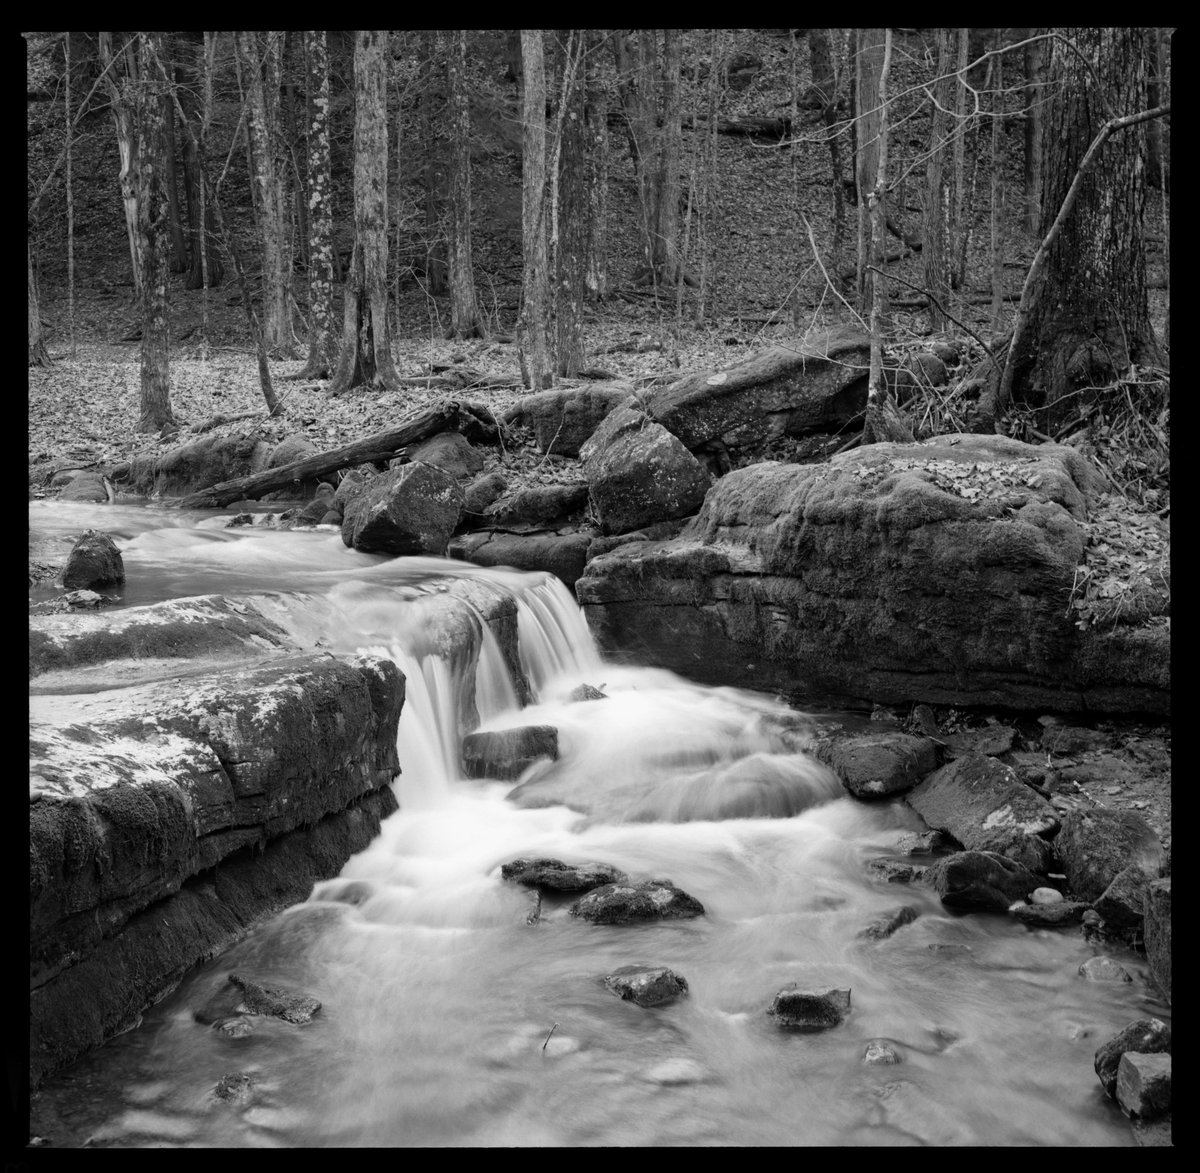 Love the photo, but it’s proving to be difficult in the #darkroom. That white water is being pesky
📷 Zeiss Ikoflex 1C + 75mm f/3.5 Carl Zeiss Tessar
🎞 Fuji Acros 100II
⚗️ Legacy Pro LMAX 1:4 | 68° | 5:30
#fujifilm #acros100 #fujiacros #filmphotography #blackandwhite